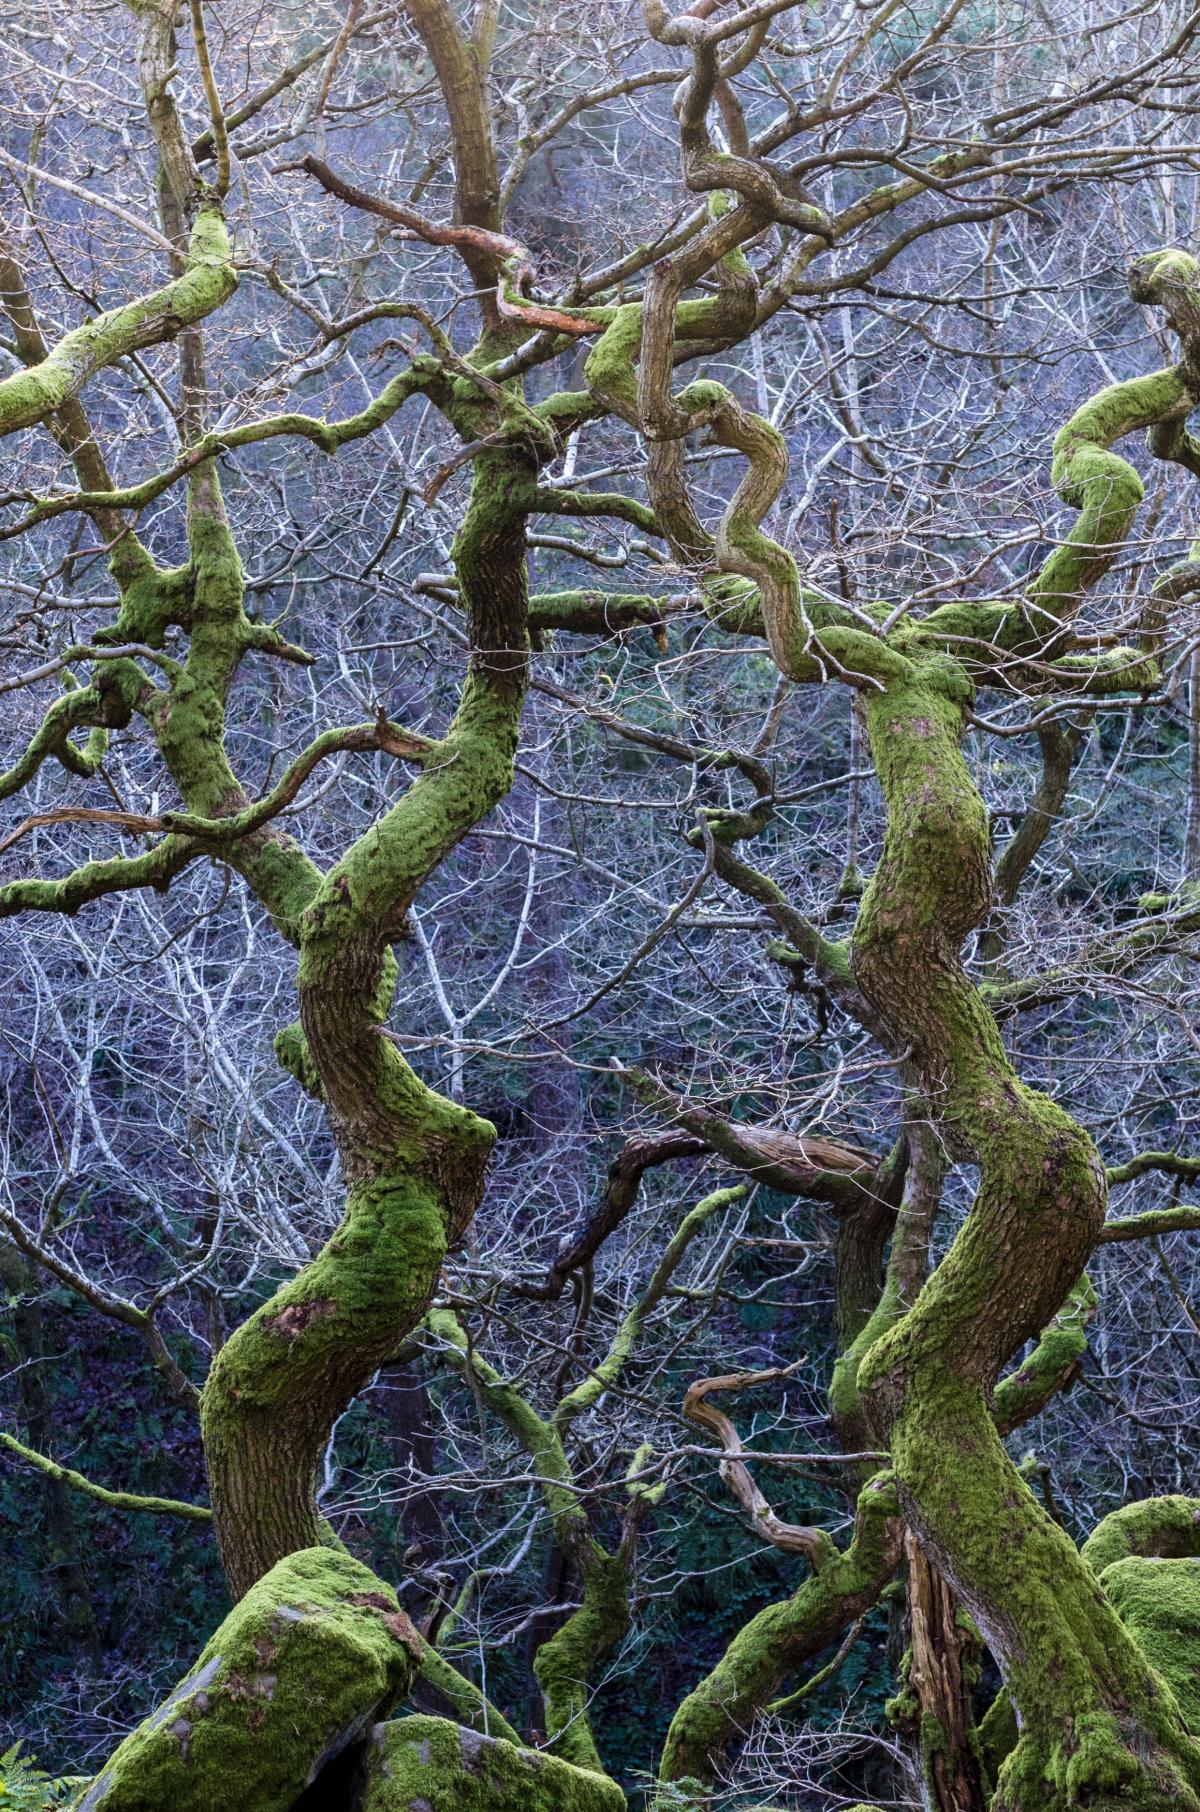 'Twisted Green' (a pedunculate oak) taken by Steve Palmer, the winning photograph in the Wild Woods category